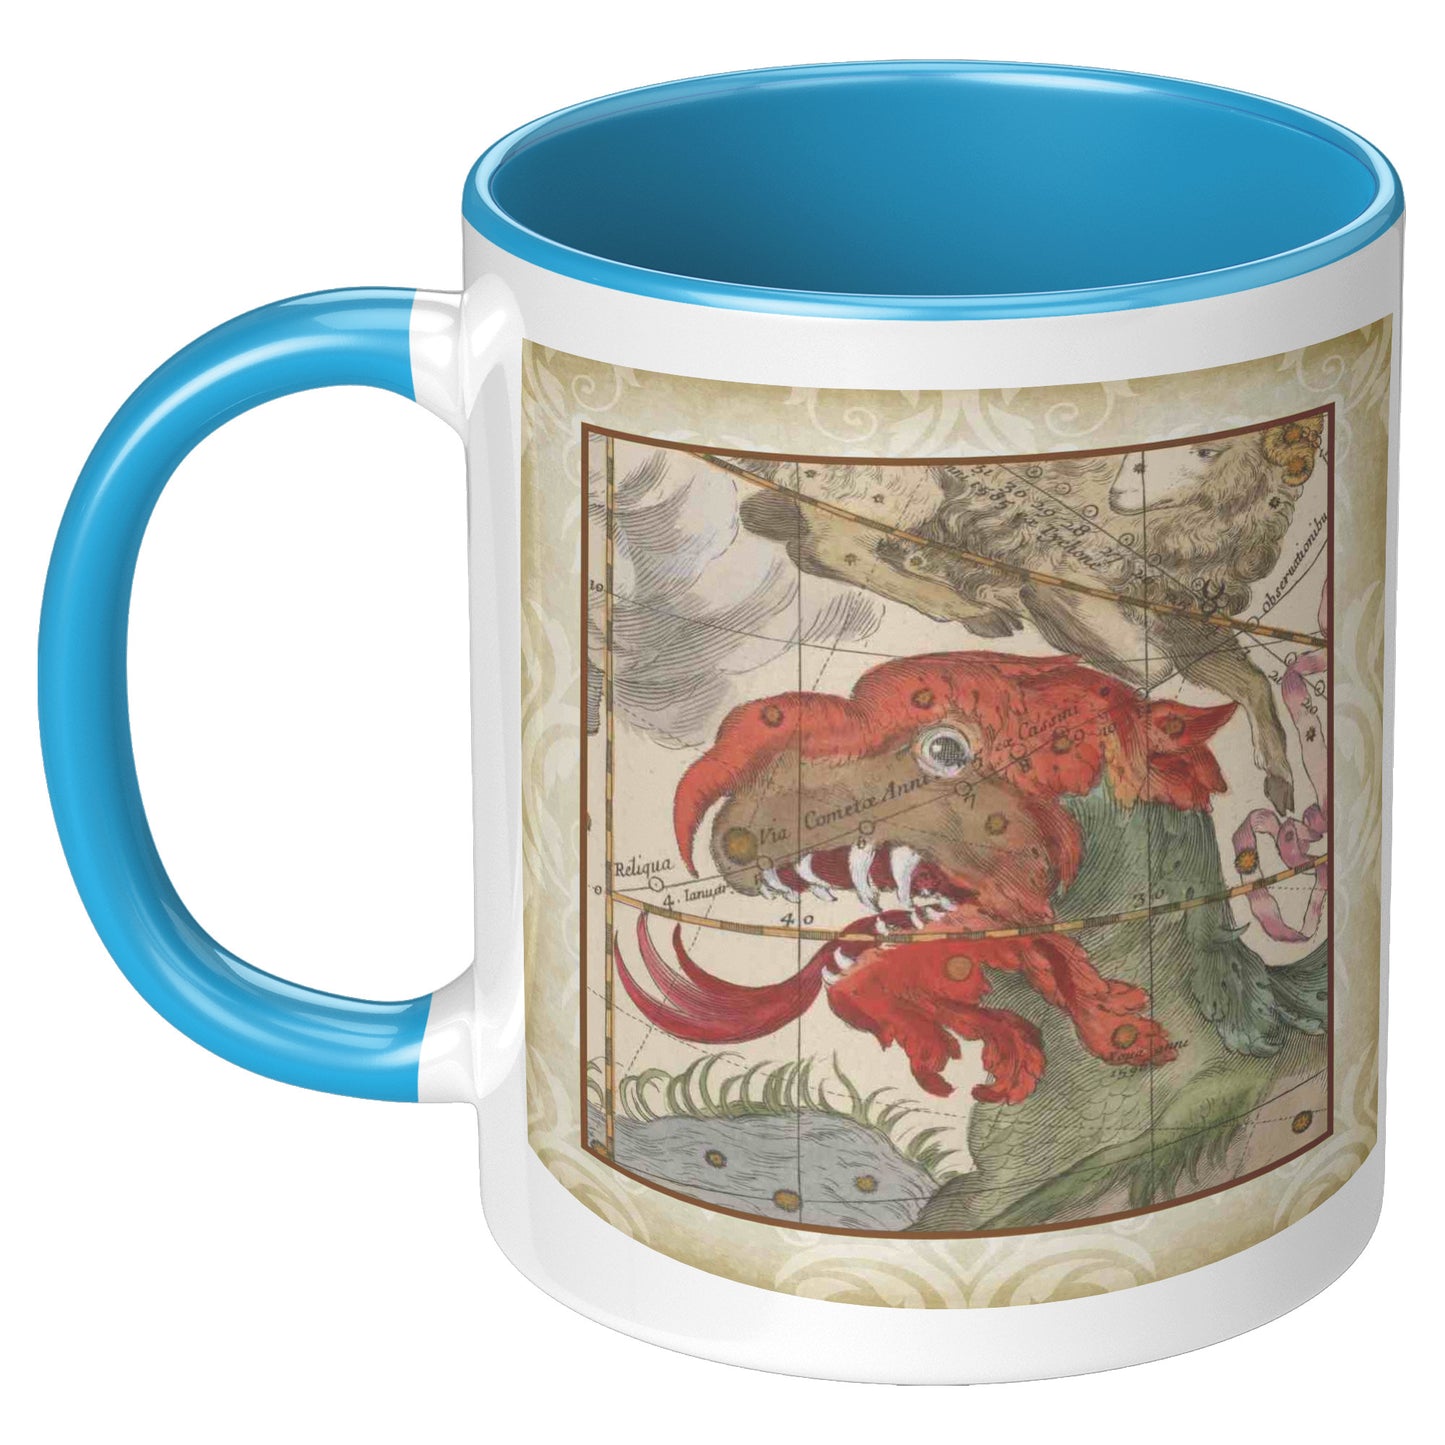 Sea Monster Accent Mug - Red Head